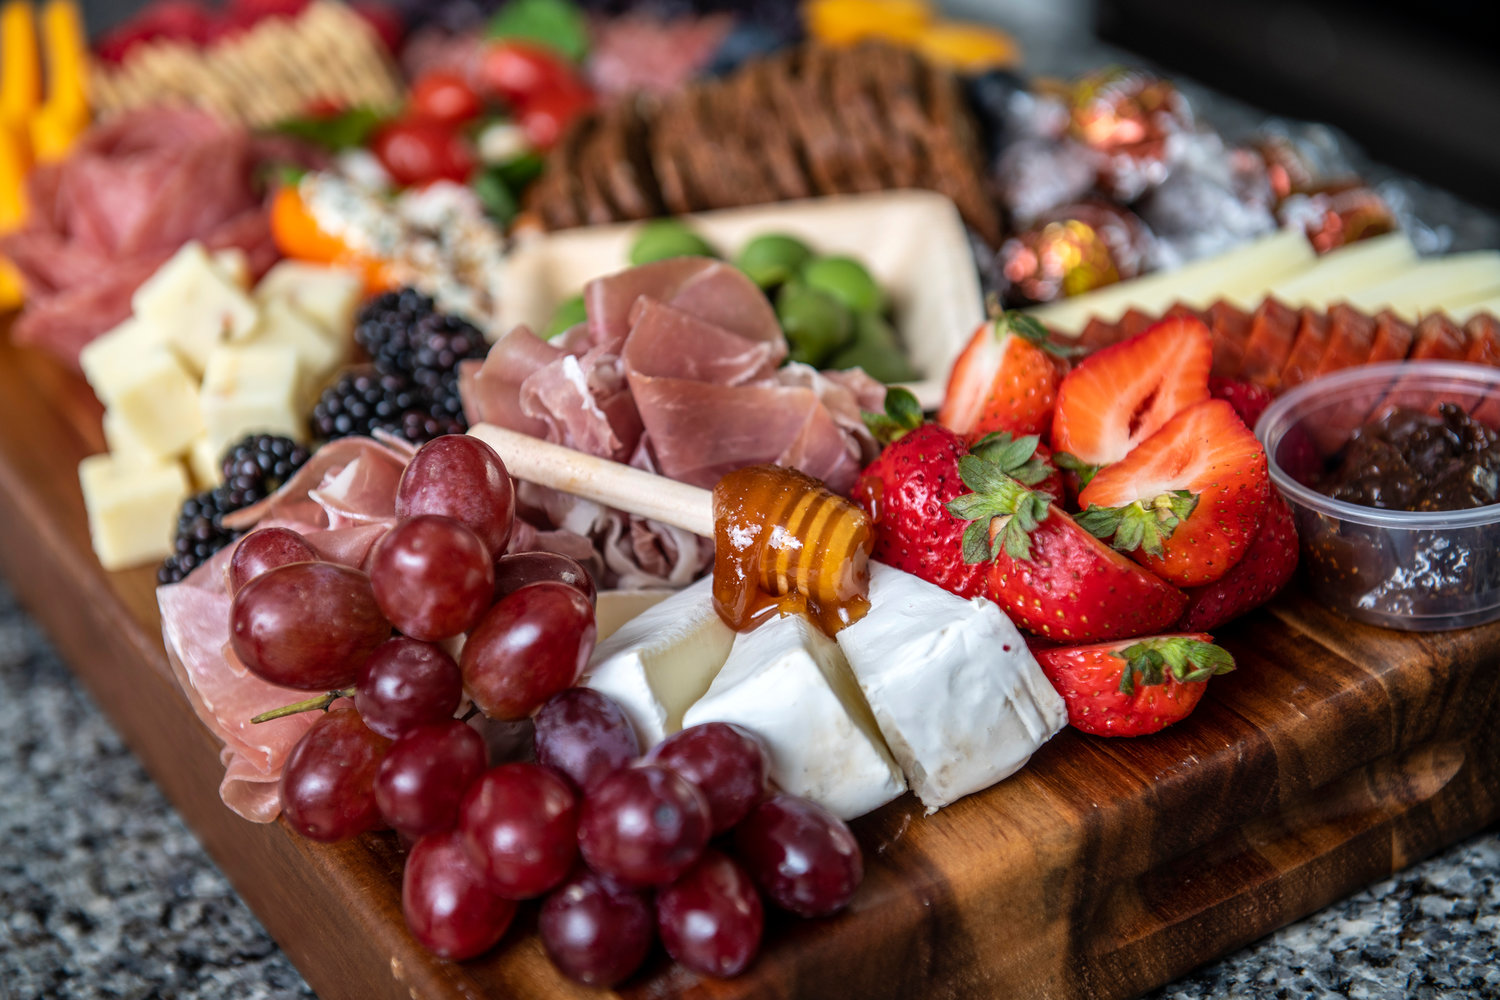 A swirl of honey adds flavor to chunks of brie in a charcuterie board created by Lindsey Smith of The Charcuterie Chic.